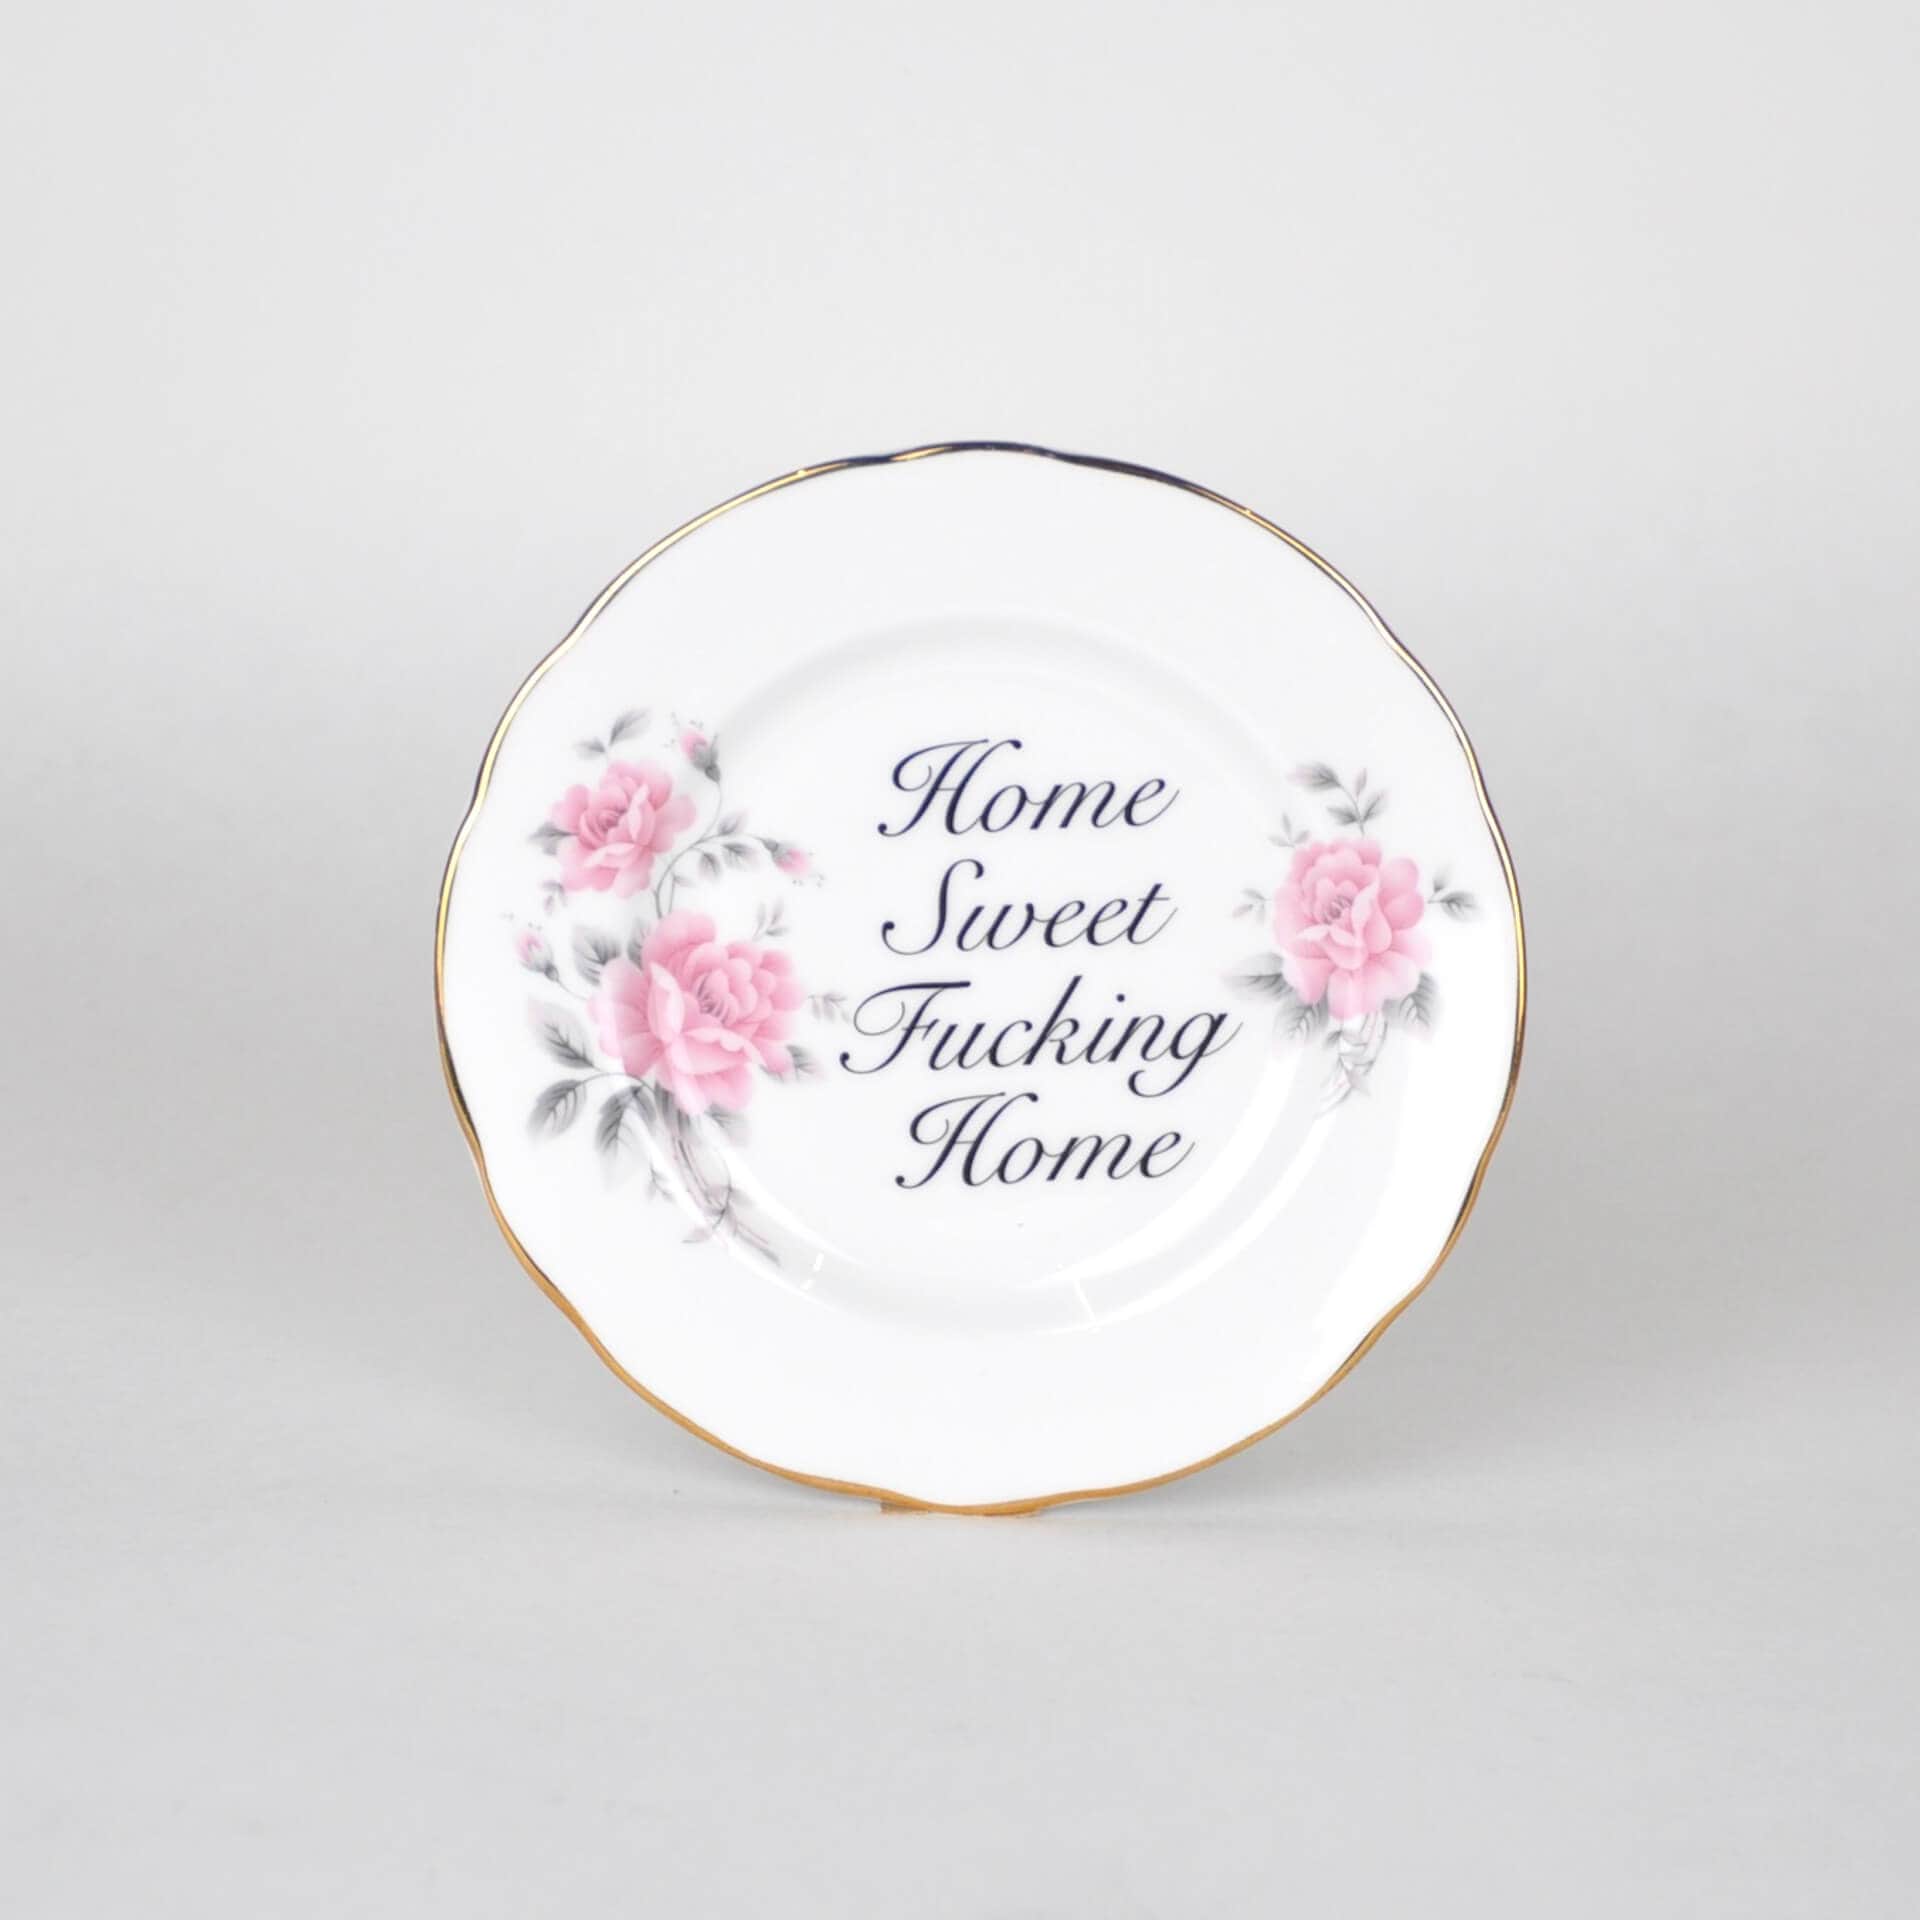 Beau & Badger Ceramics A Decorative Wall Plate - Home Sweet F*cking Home